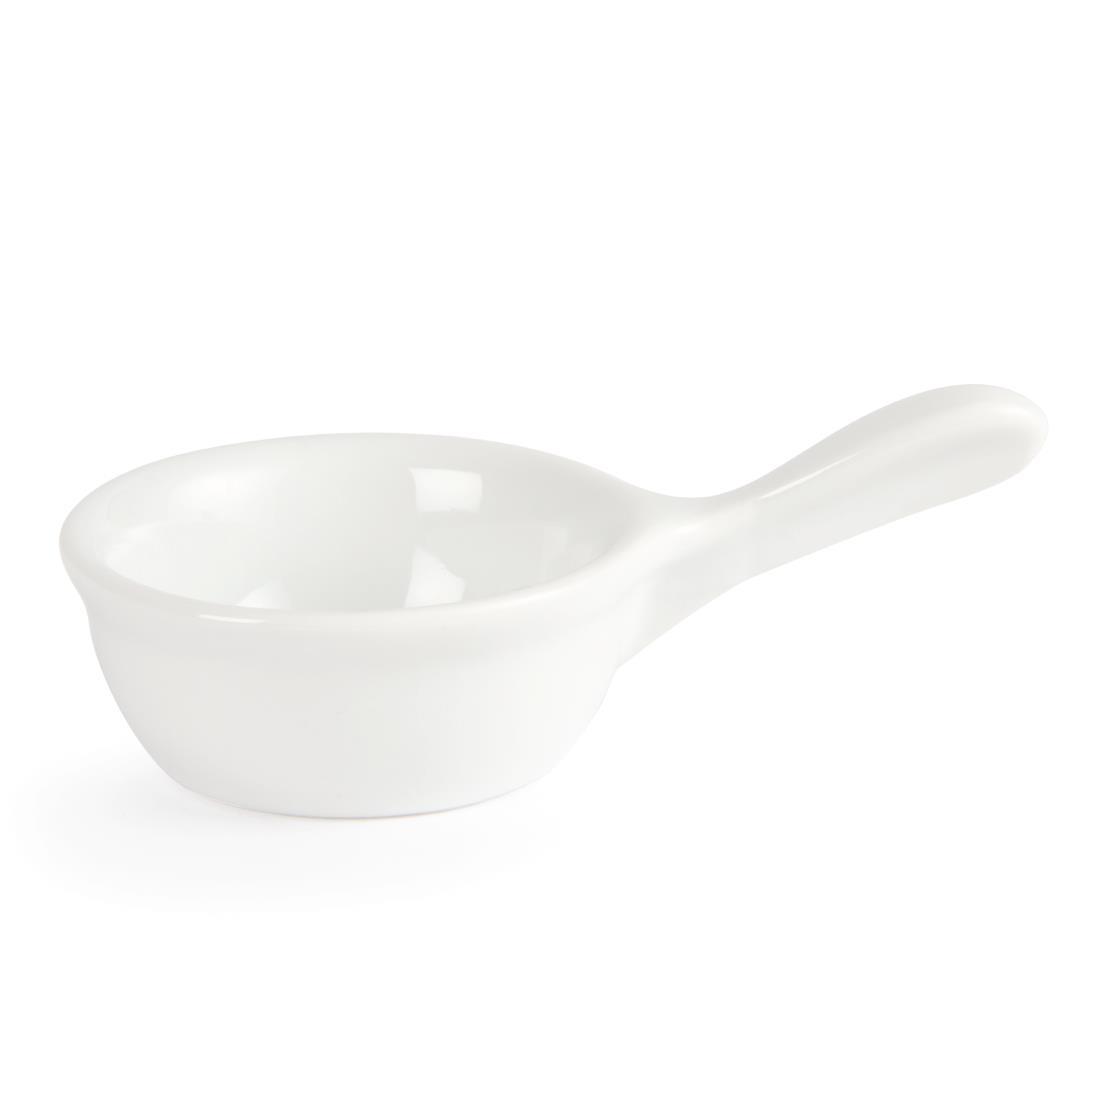 Olympia Miniature Pan Shaped Bowls 35ml 1.2oz (Pack of 12) - CE544  - 3